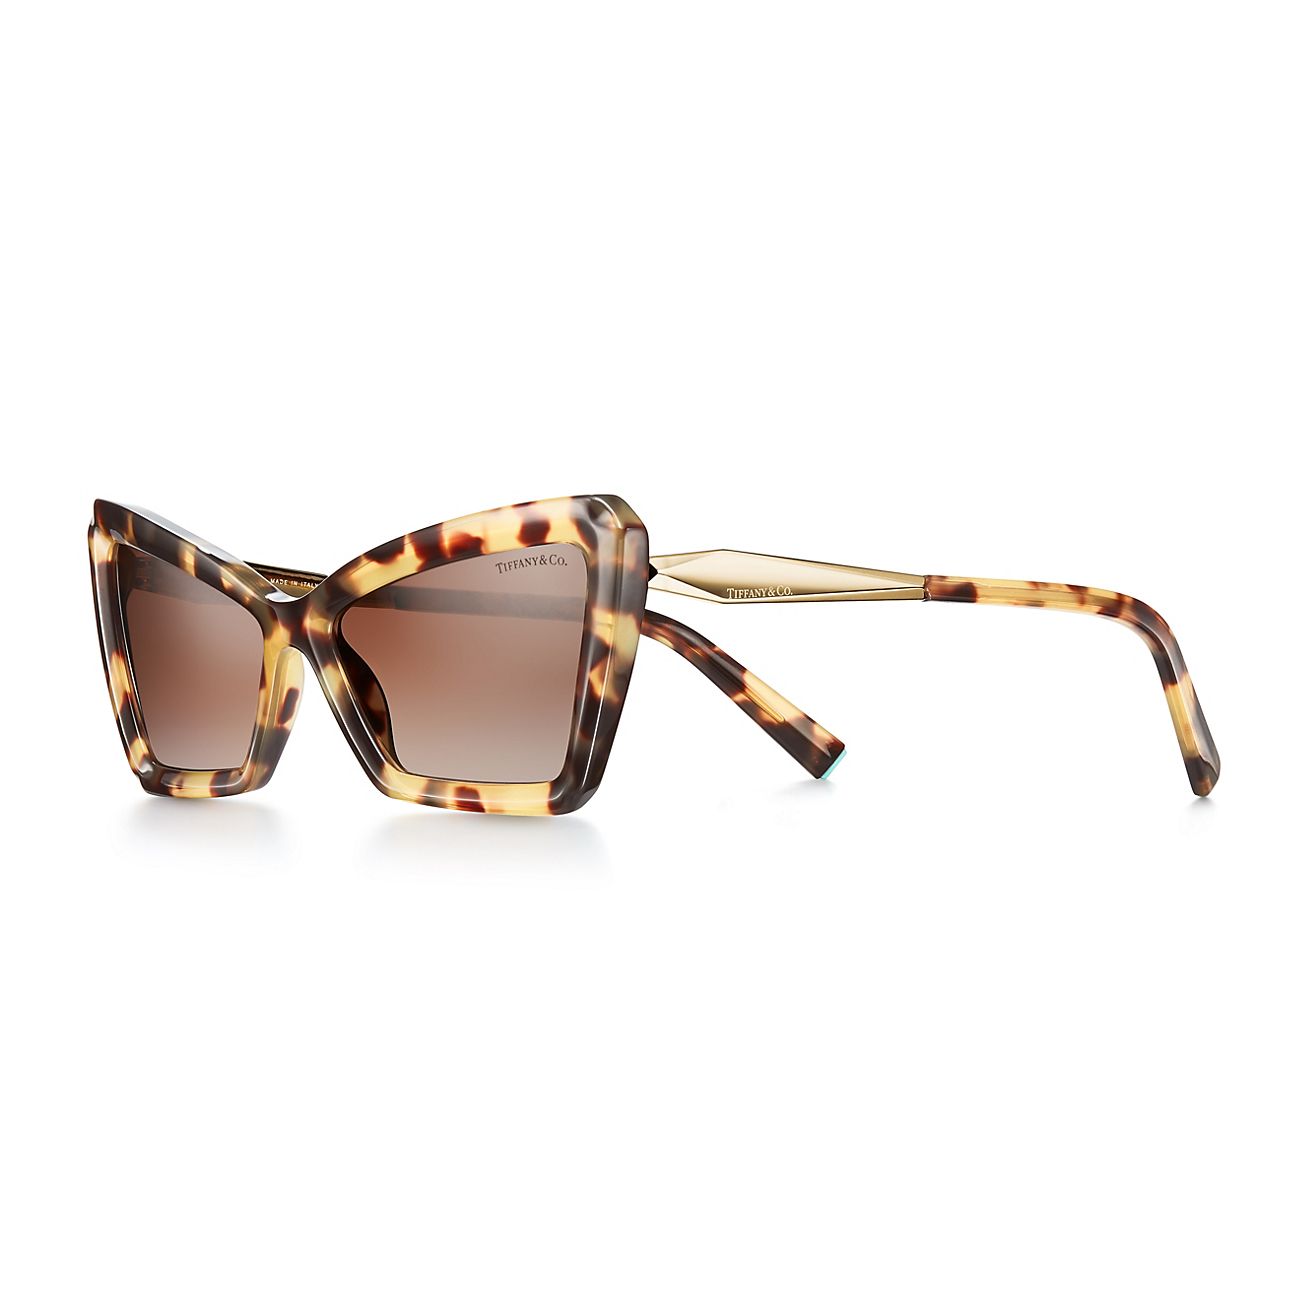 Tiffany Sunglasses in Yellow Tortoise Acetate with Brown Lenses 